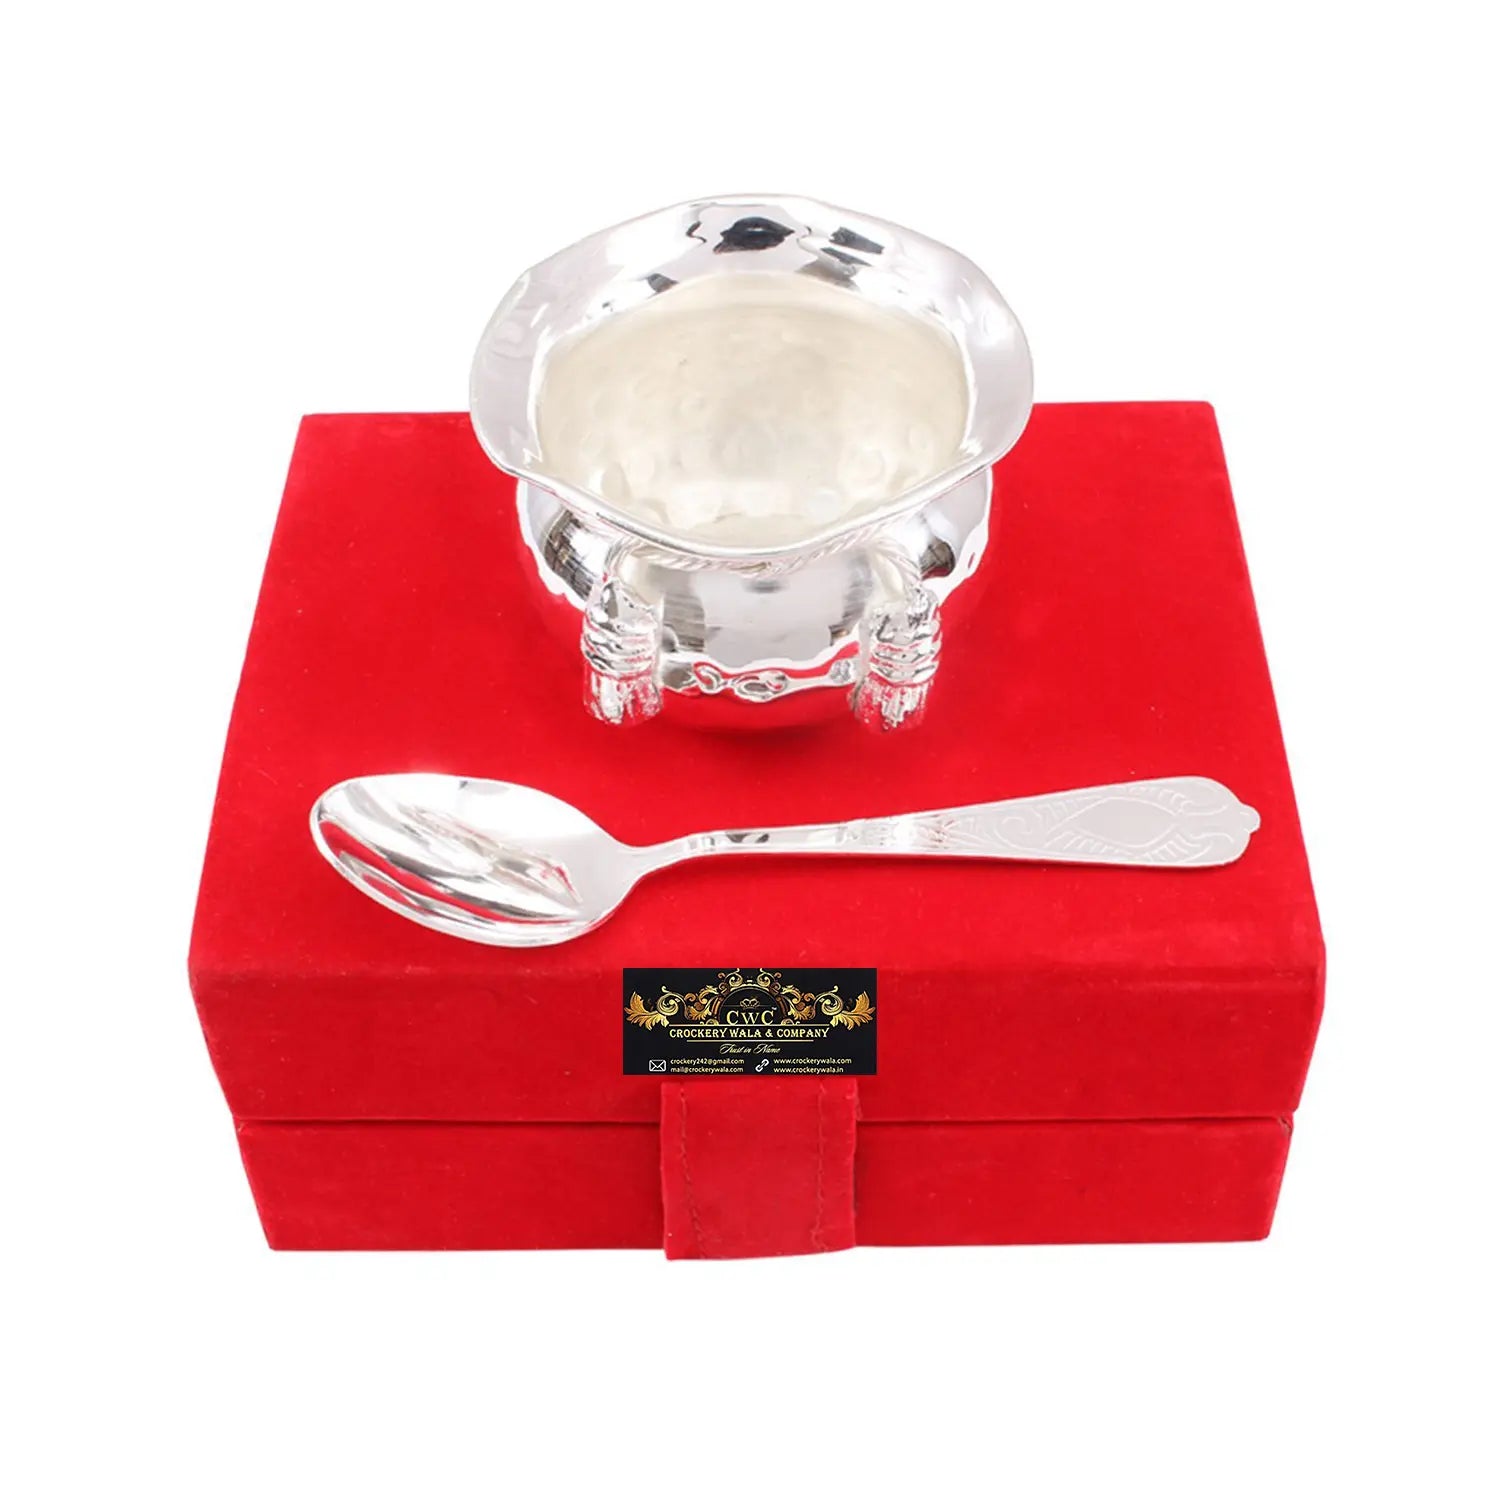 4 Bowls and 1 Plate with Spoon Crockery Set Gift Pack with Classic and  Elegant Design